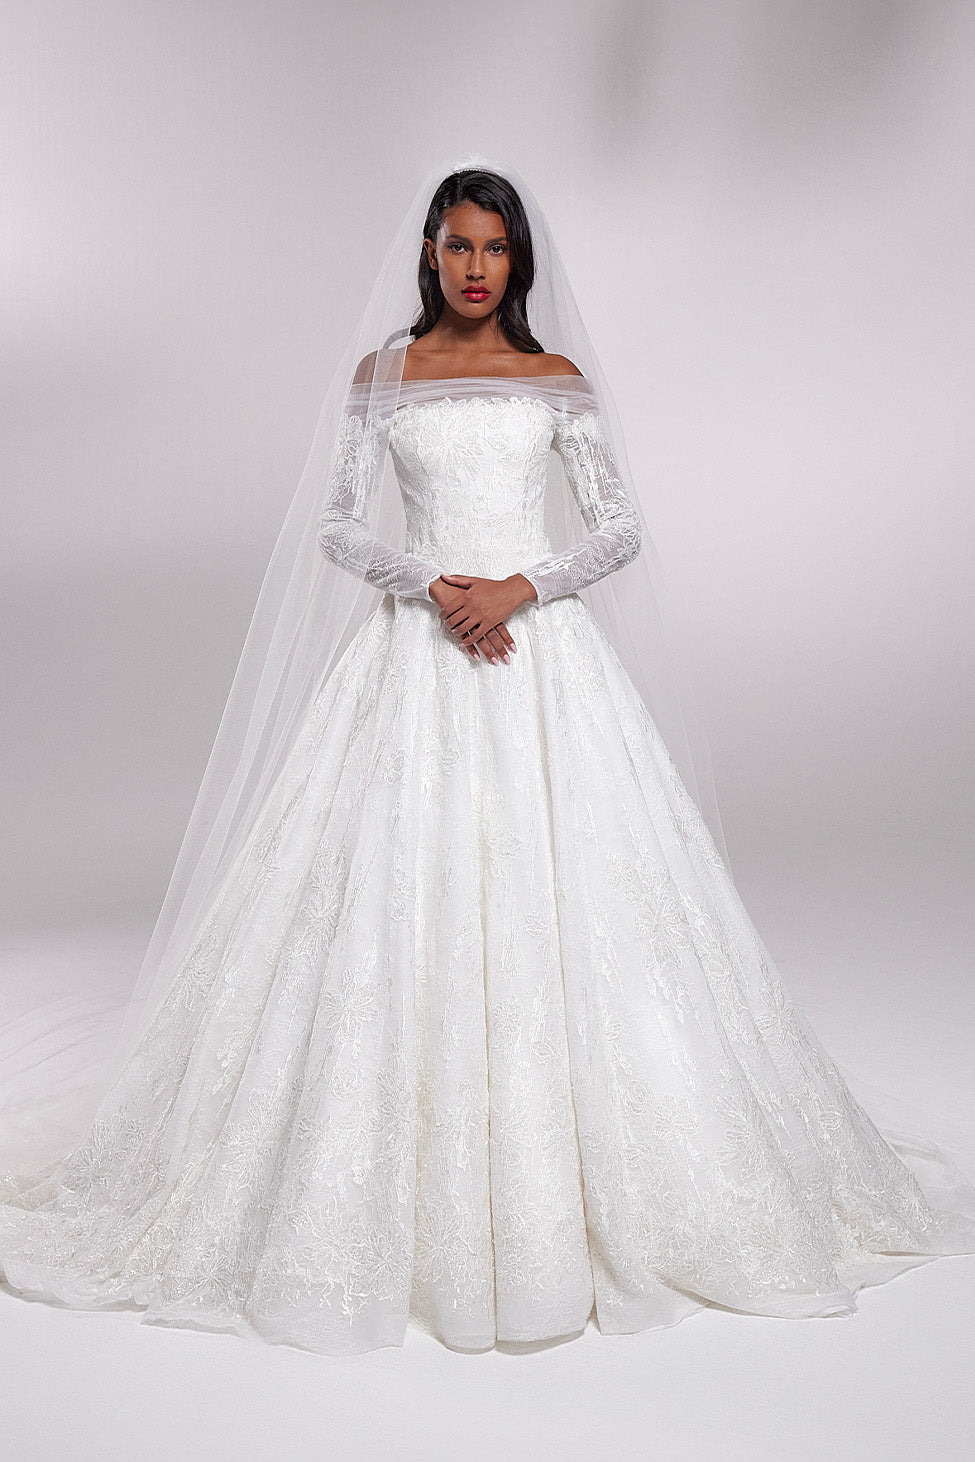 Fairytale volume embellished lace wedding dress with long sleeves